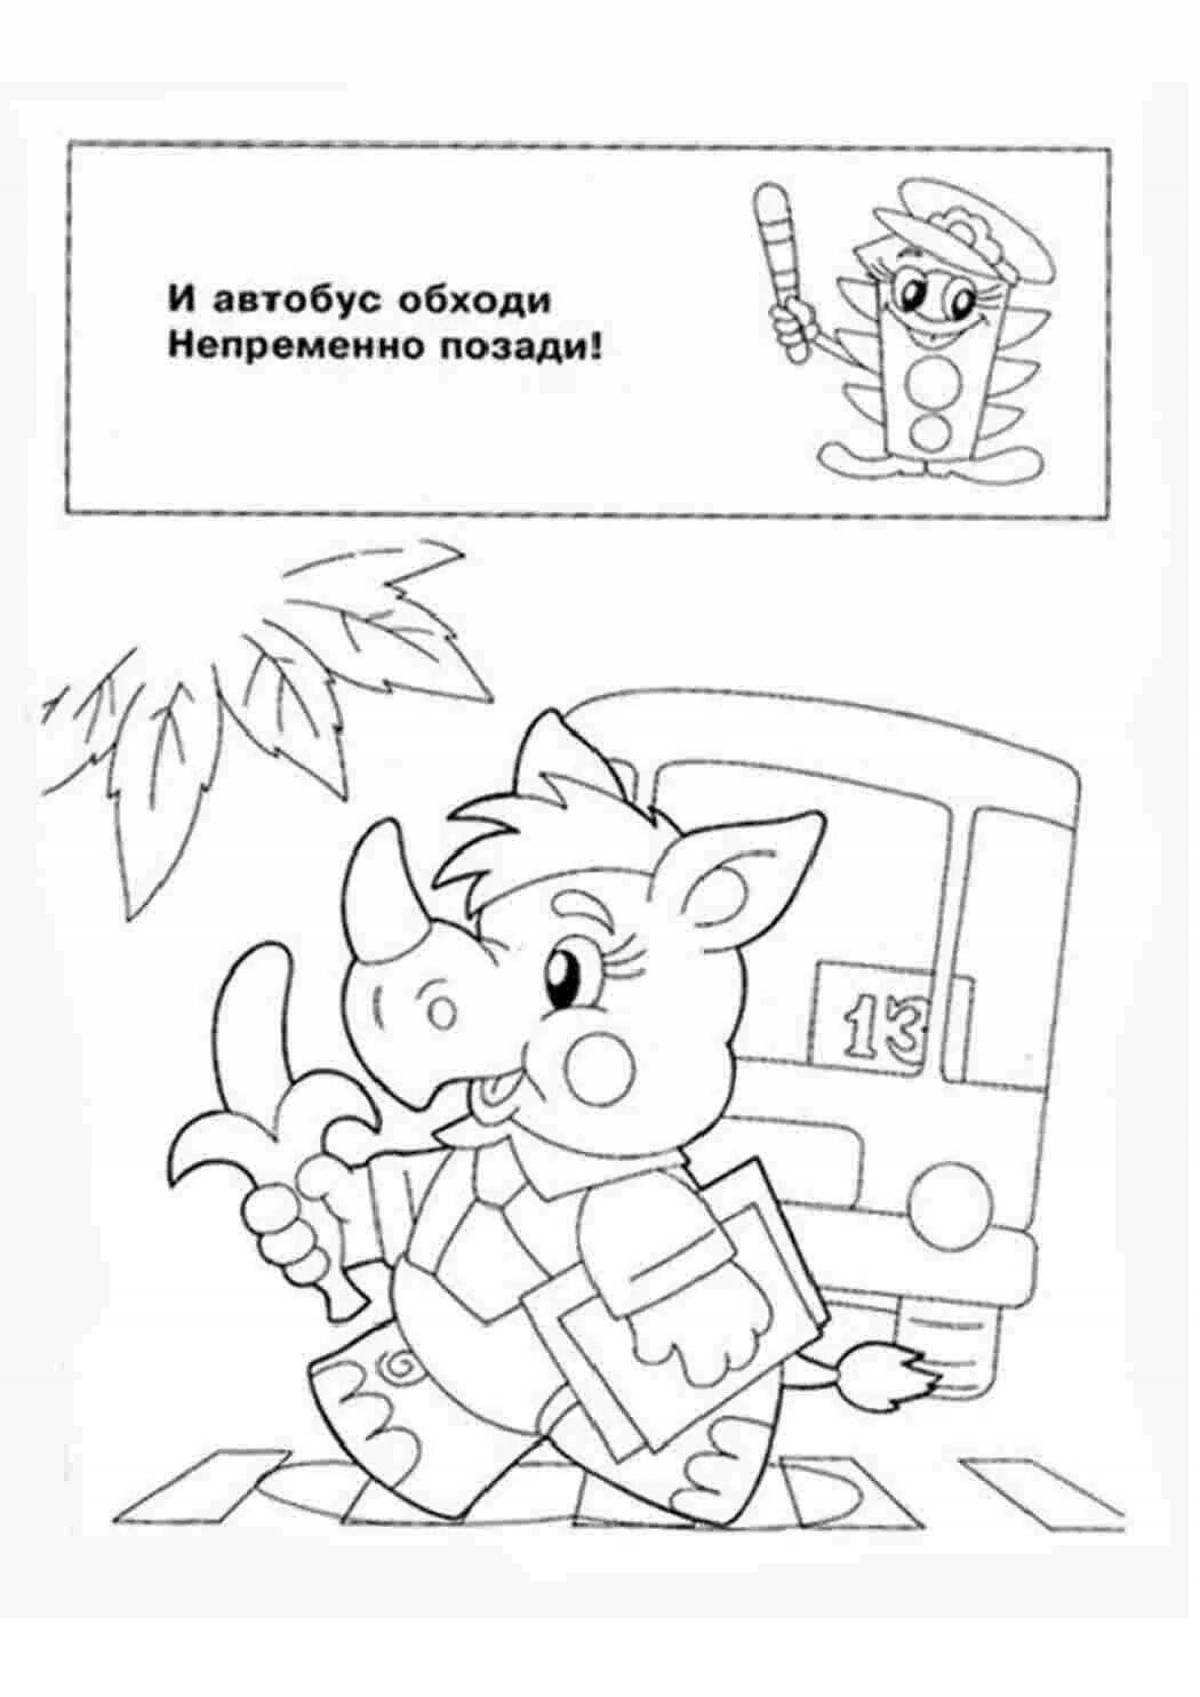 Fun rules of the road for kids coloring pages